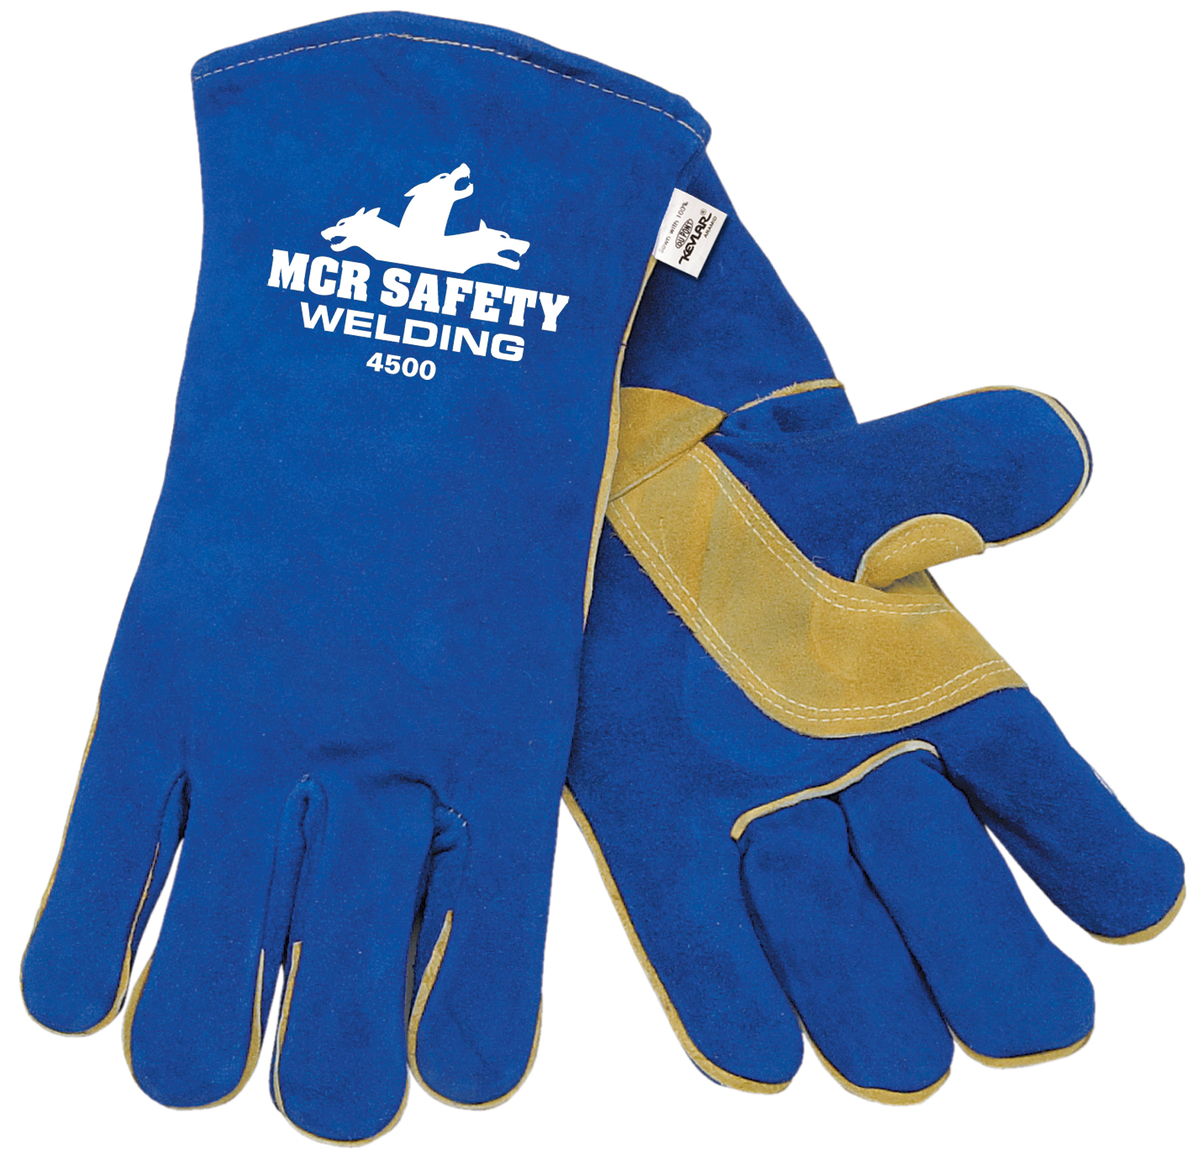 Foam Lined Select Shoulder Cow Skin Leather Welding Work Gloves with Reinforced Wing Thumb - Gloves